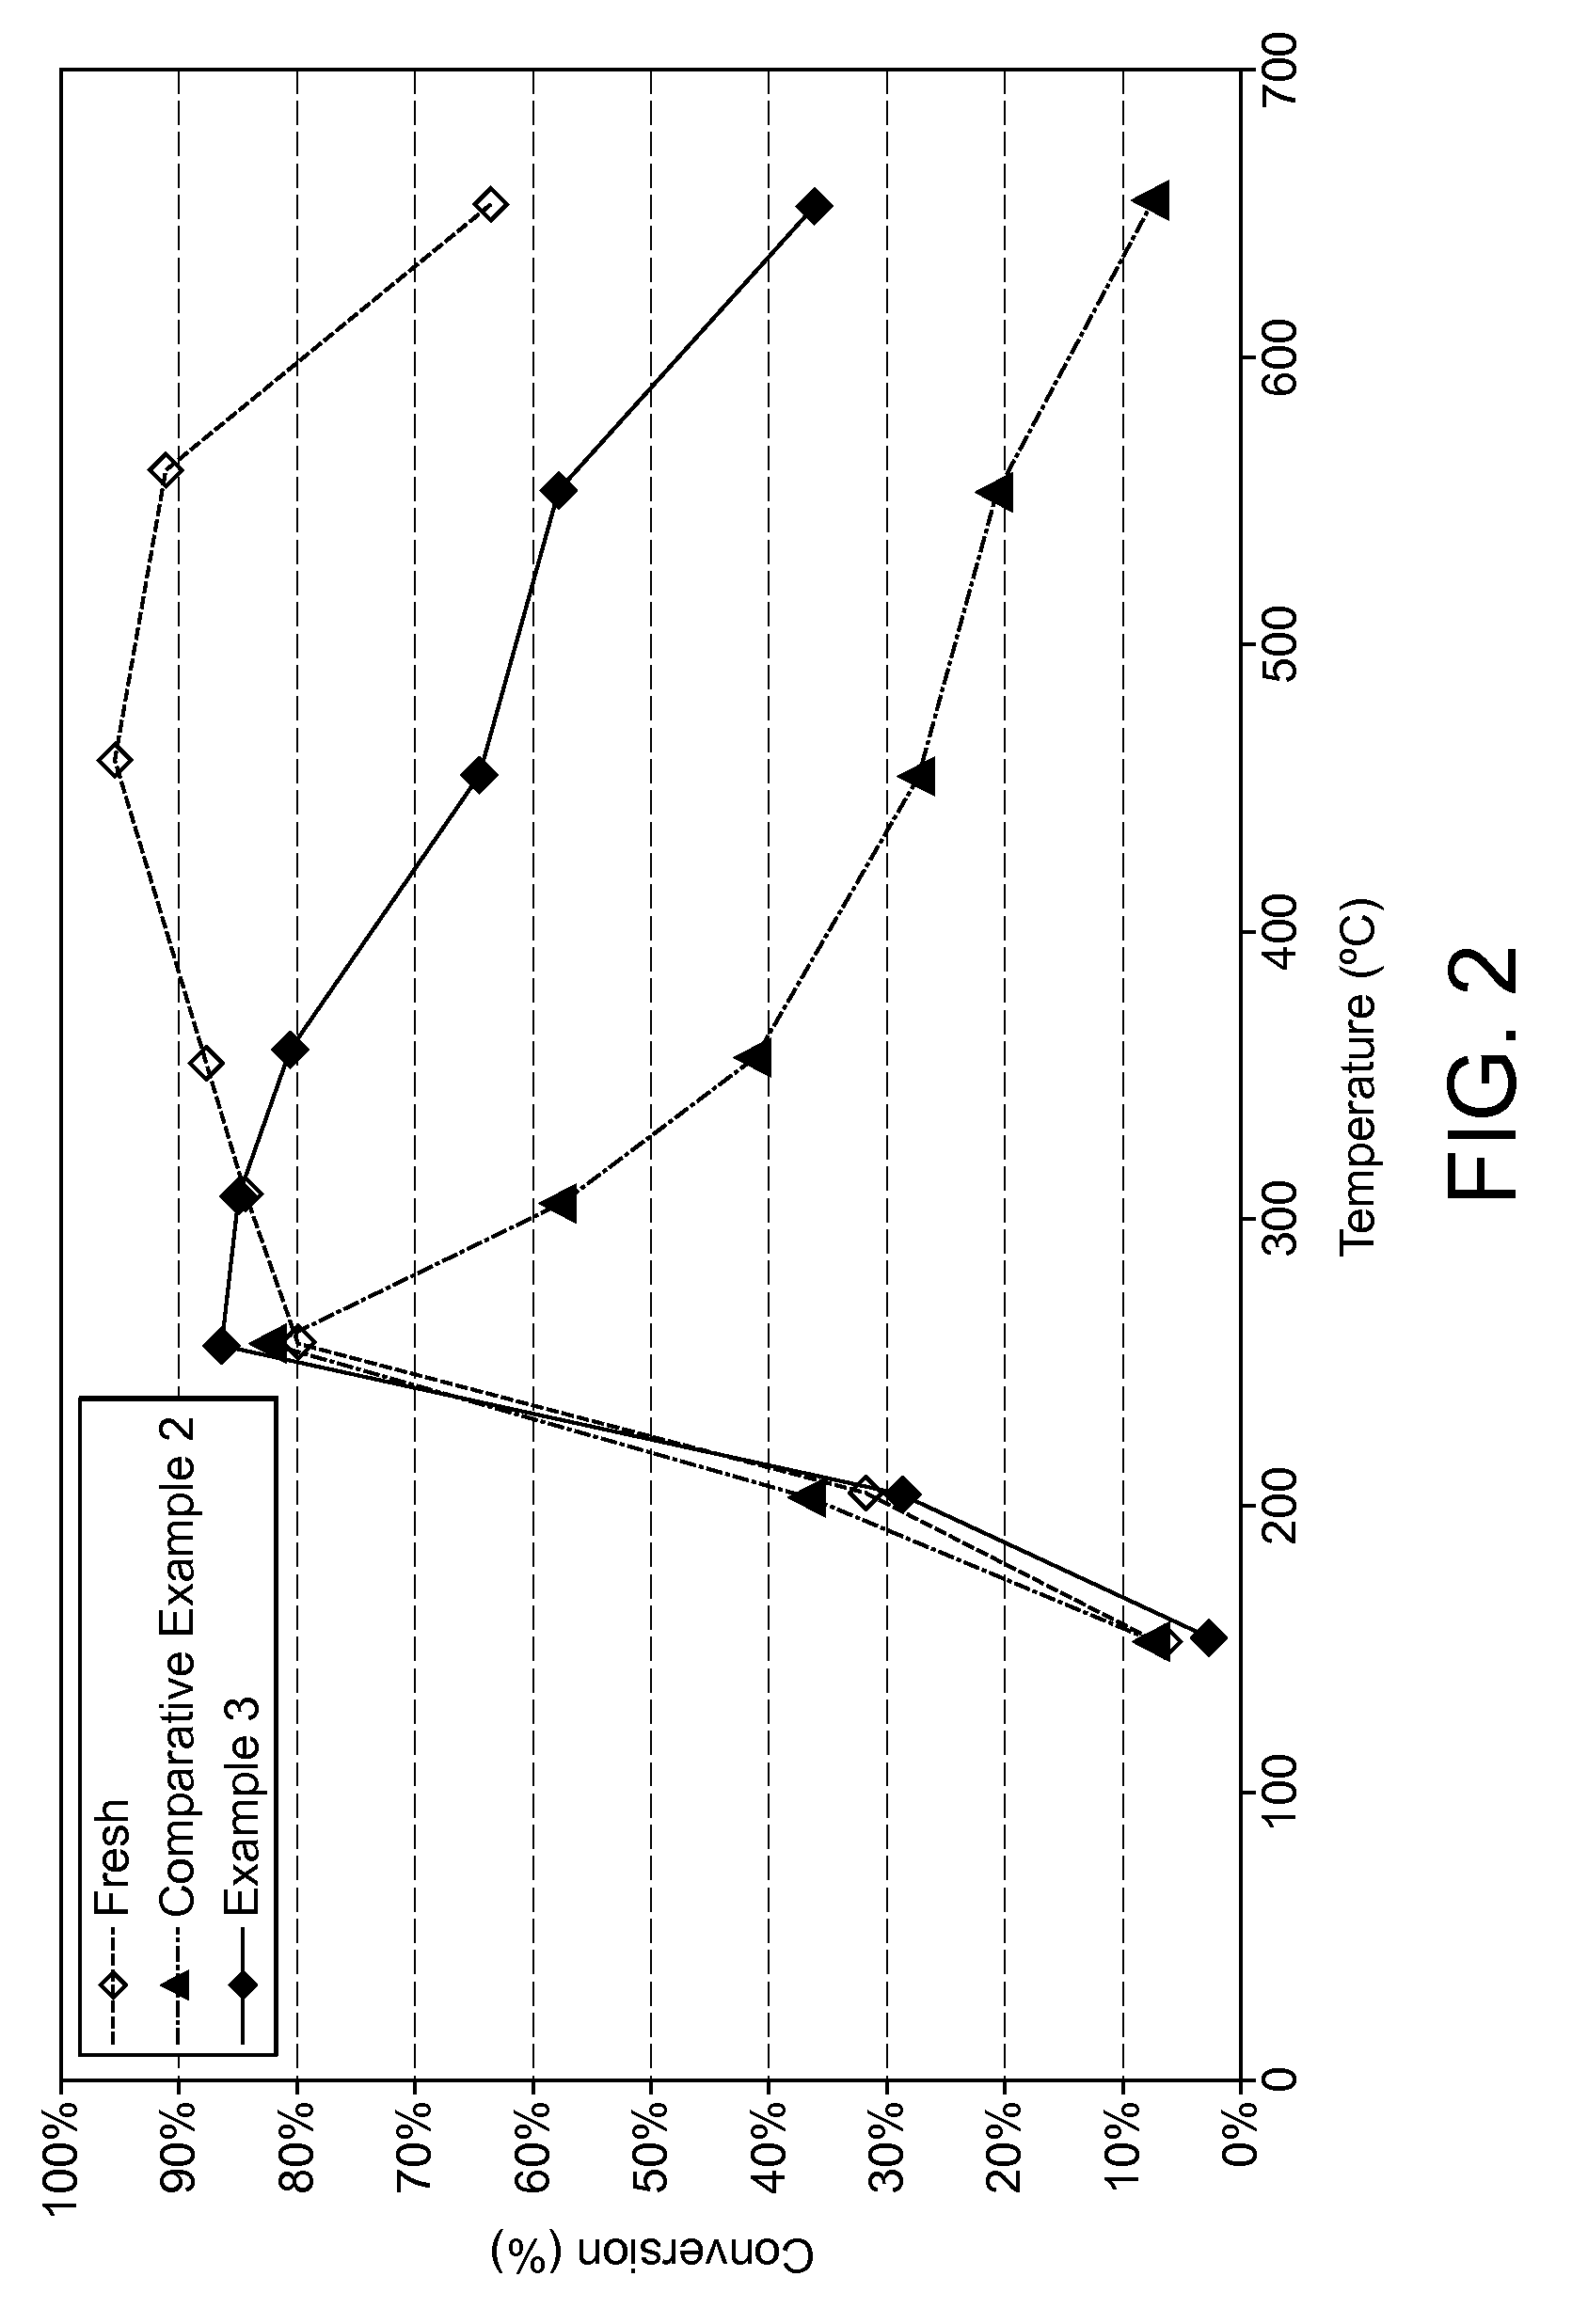 Exhaust system for a lean-burn internal combustion engine including SCR catalyst